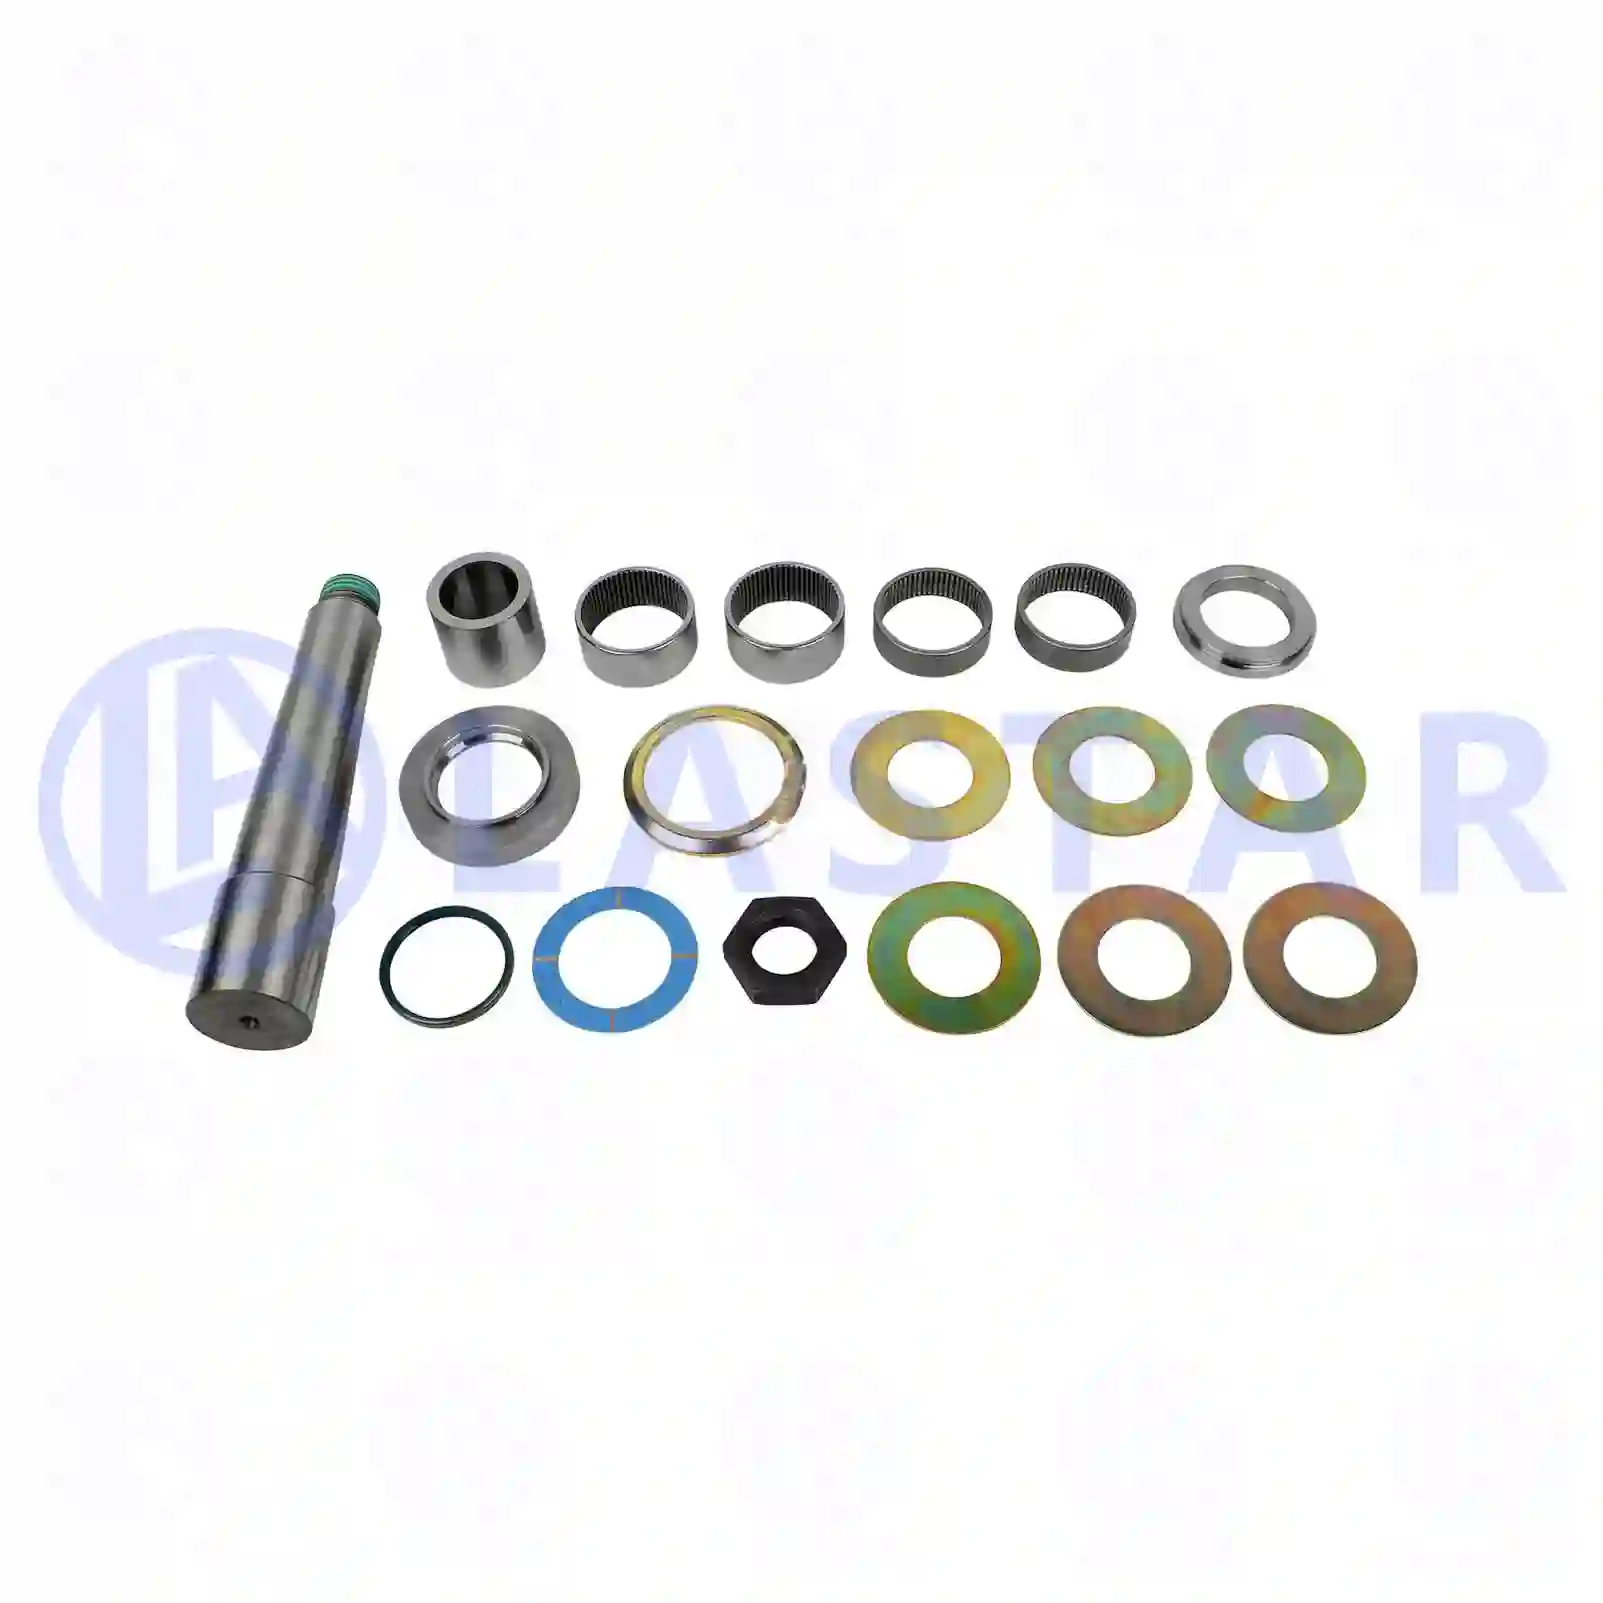  King pin kit || Lastar Spare Part | Truck Spare Parts, Auotomotive Spare Parts